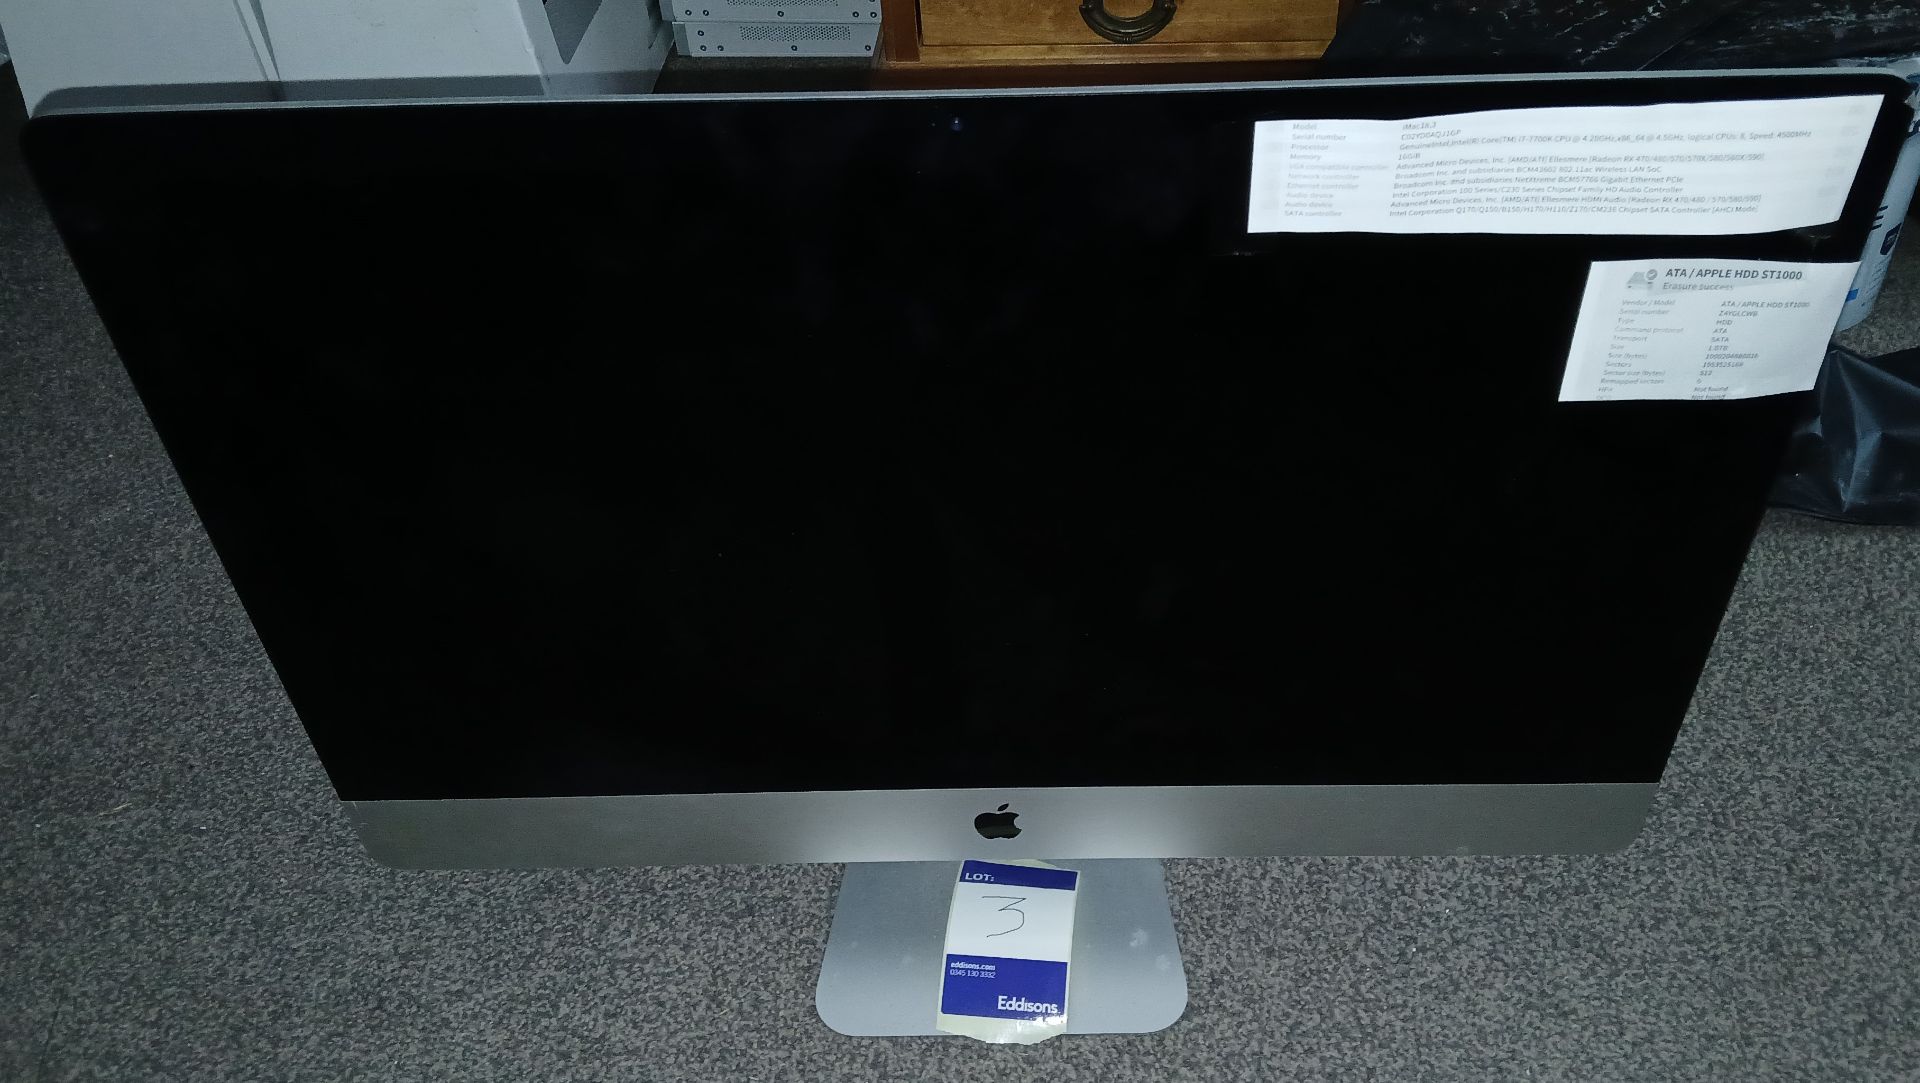 Apple iMac (Retina 5K, 27”, 2017), Serial Number C02YD0AQJ1GP (iMac only, no mouse, keyboard, or - Image 2 of 6